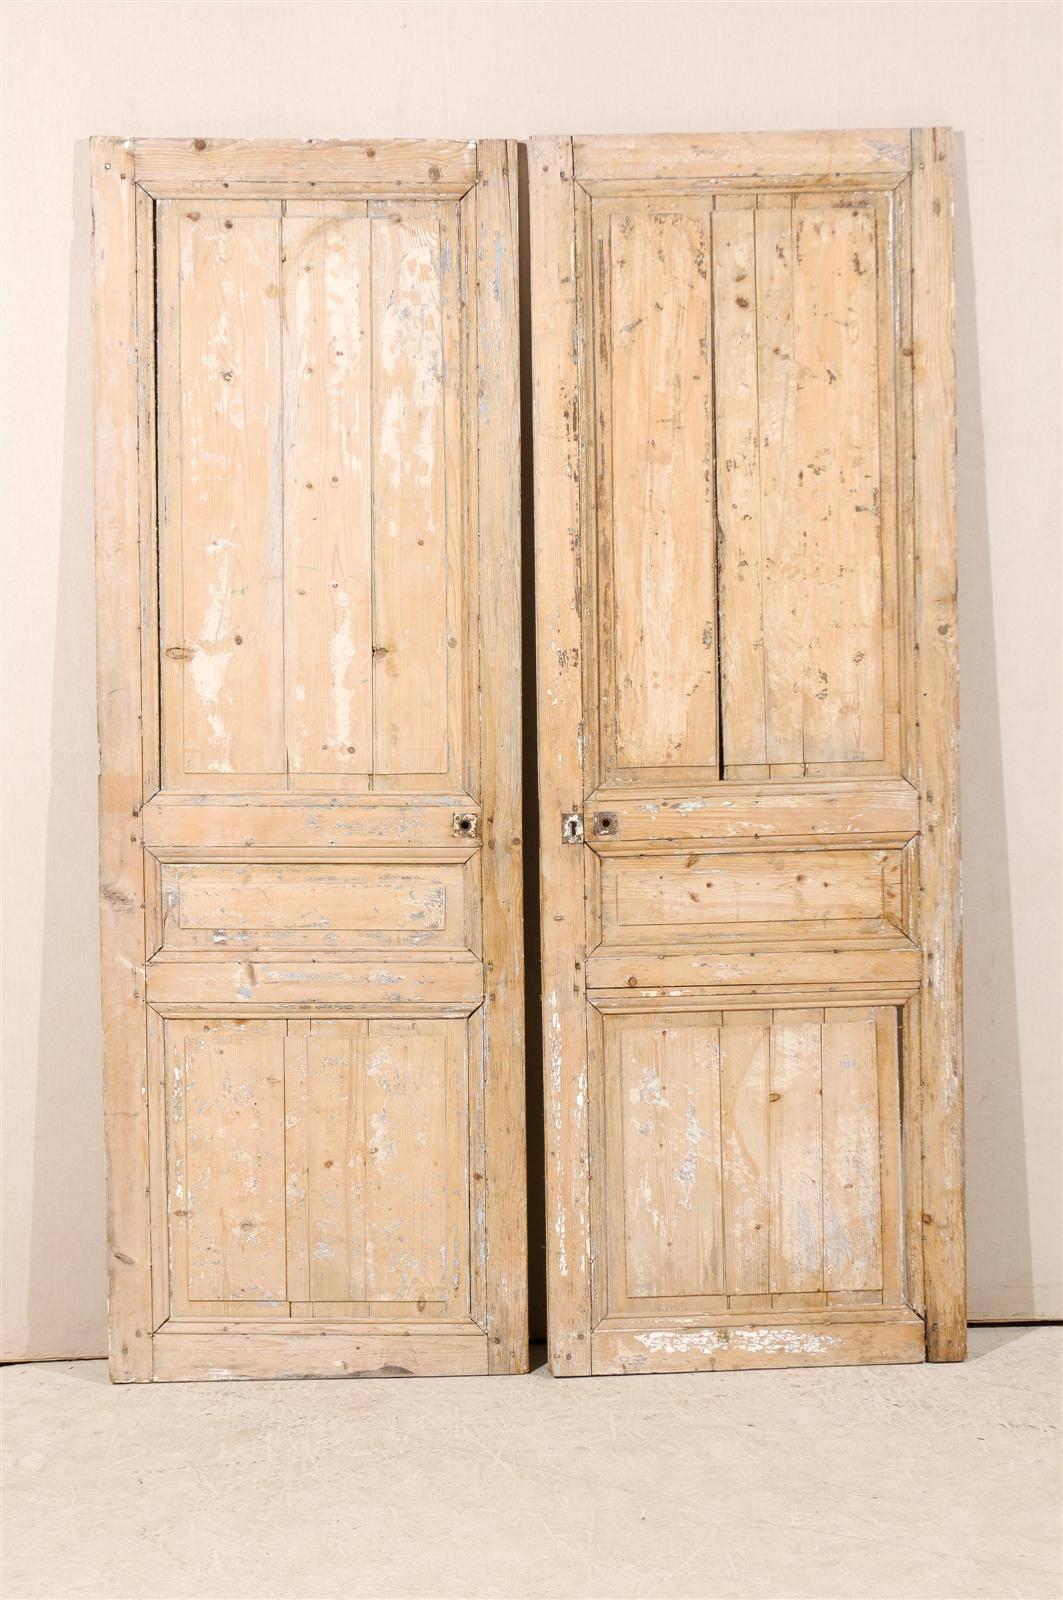 A pair of 19th century French scraped wooden doors with good distressed look.